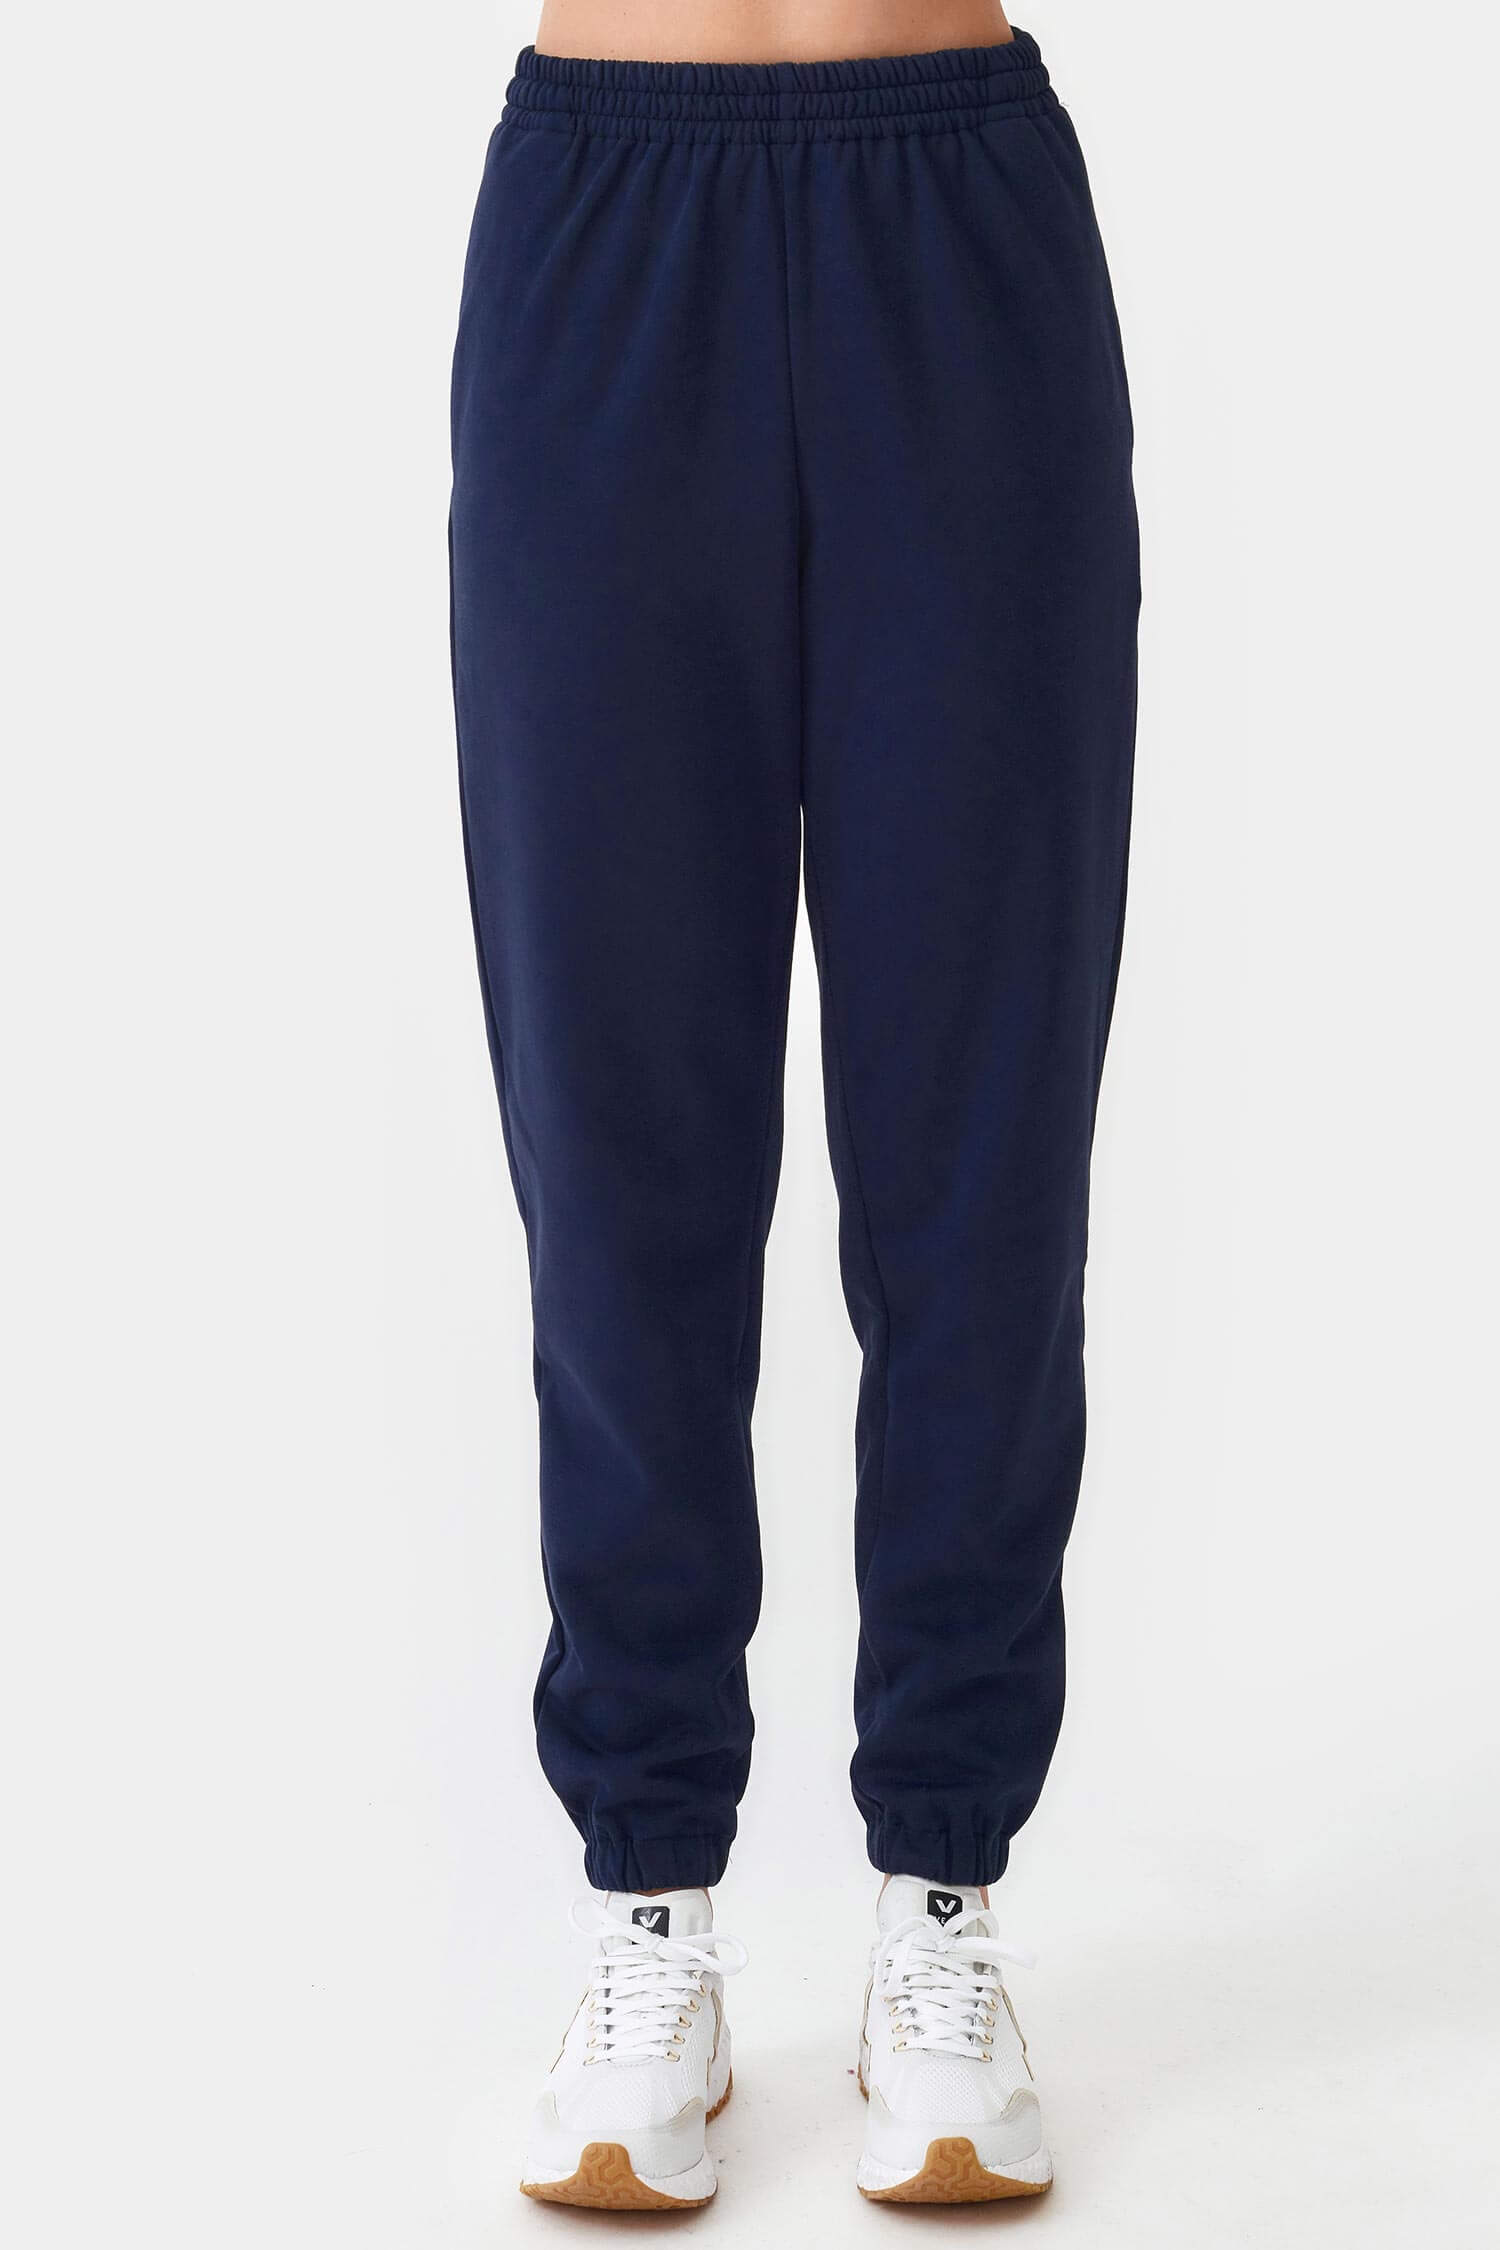 Navy Blue Cotton Track Pant at Rs 430/set | Track Pant in Mumbai | ID:  13877806412